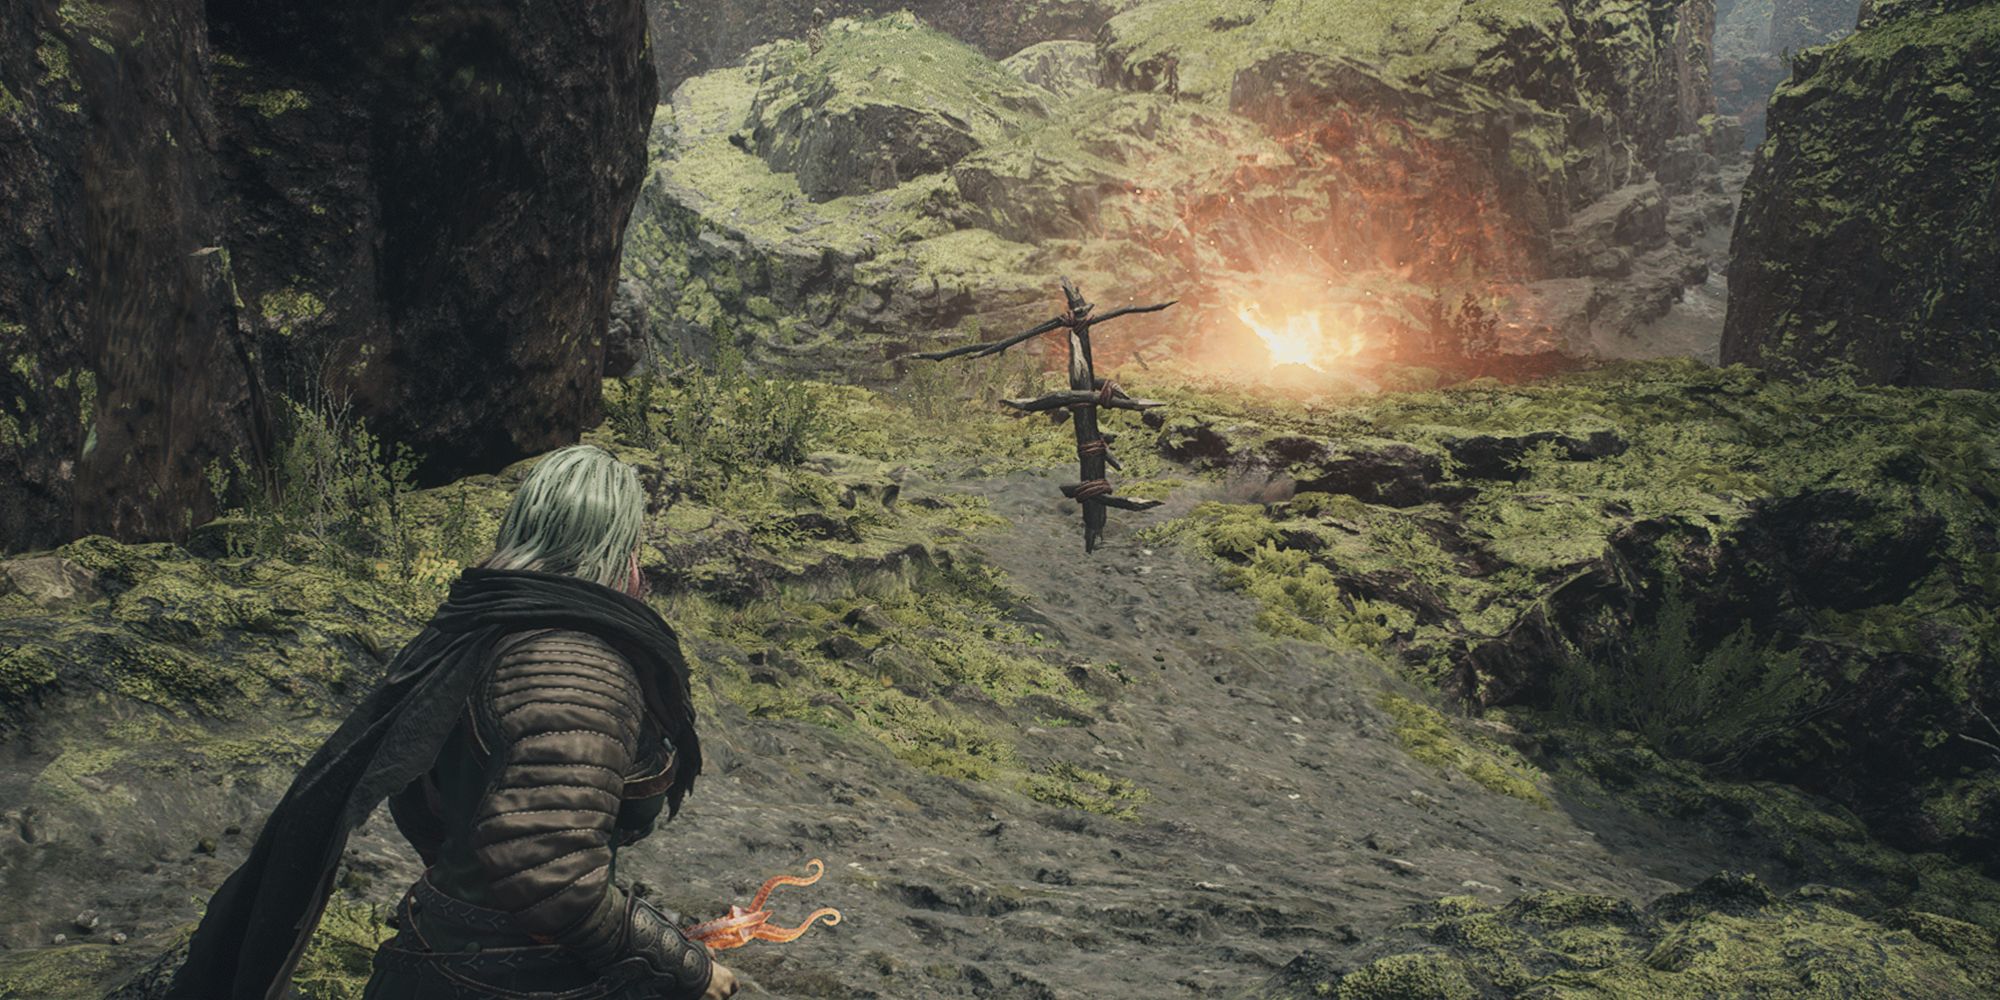 Dragon's Dogma 2 - Arisen Looking At Incandescent Orb In The Distance